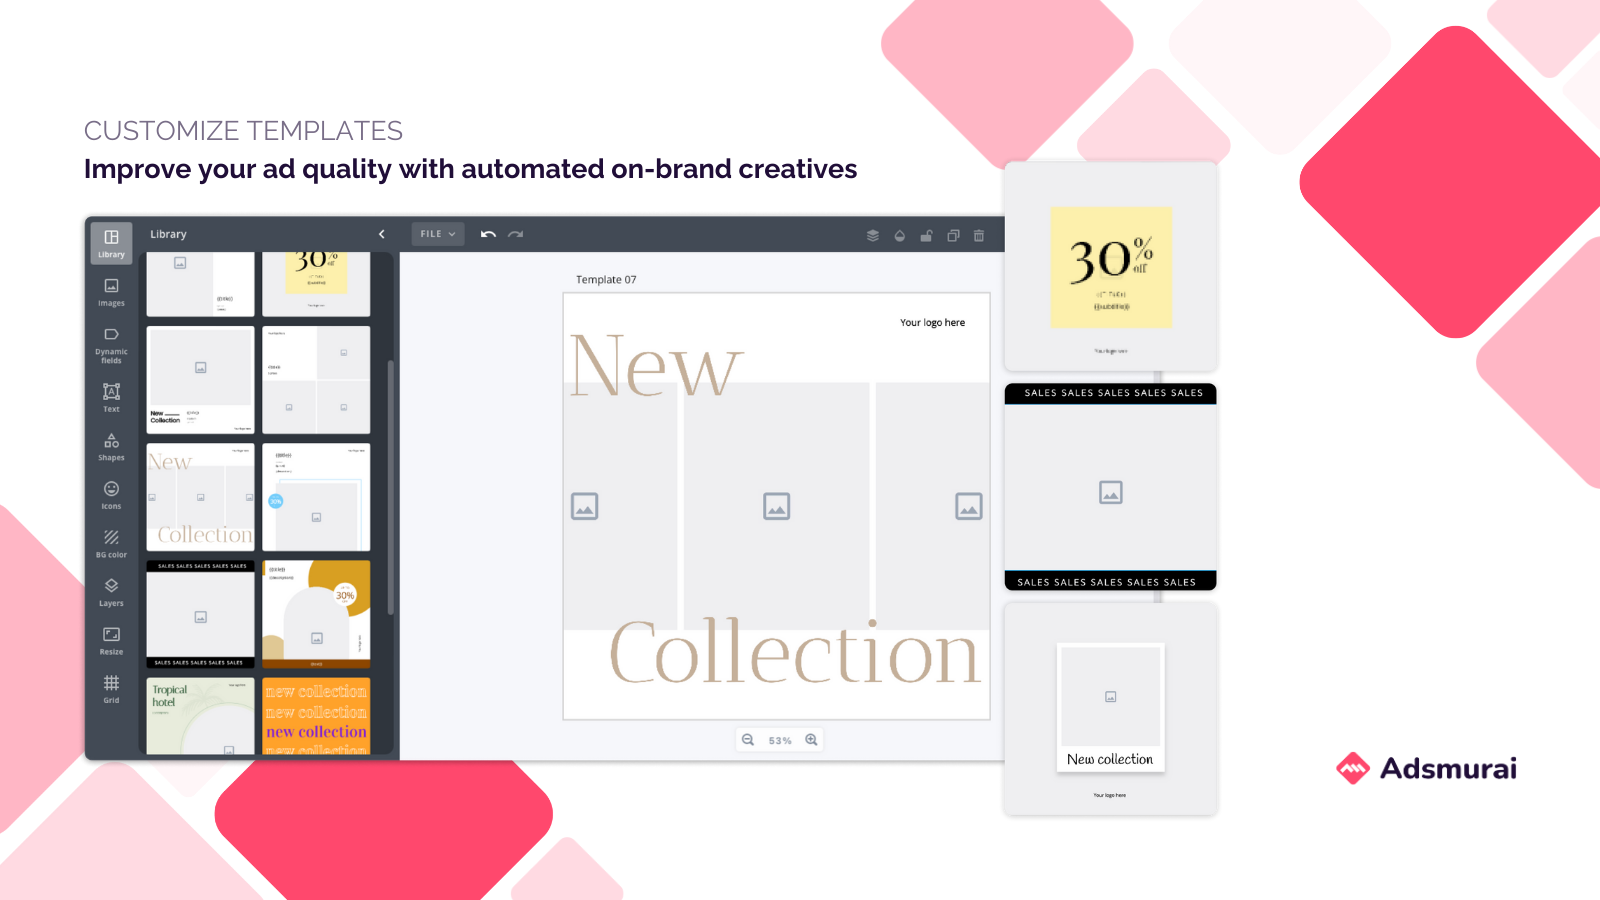 Improve your ad quality with automated on-brand creatives